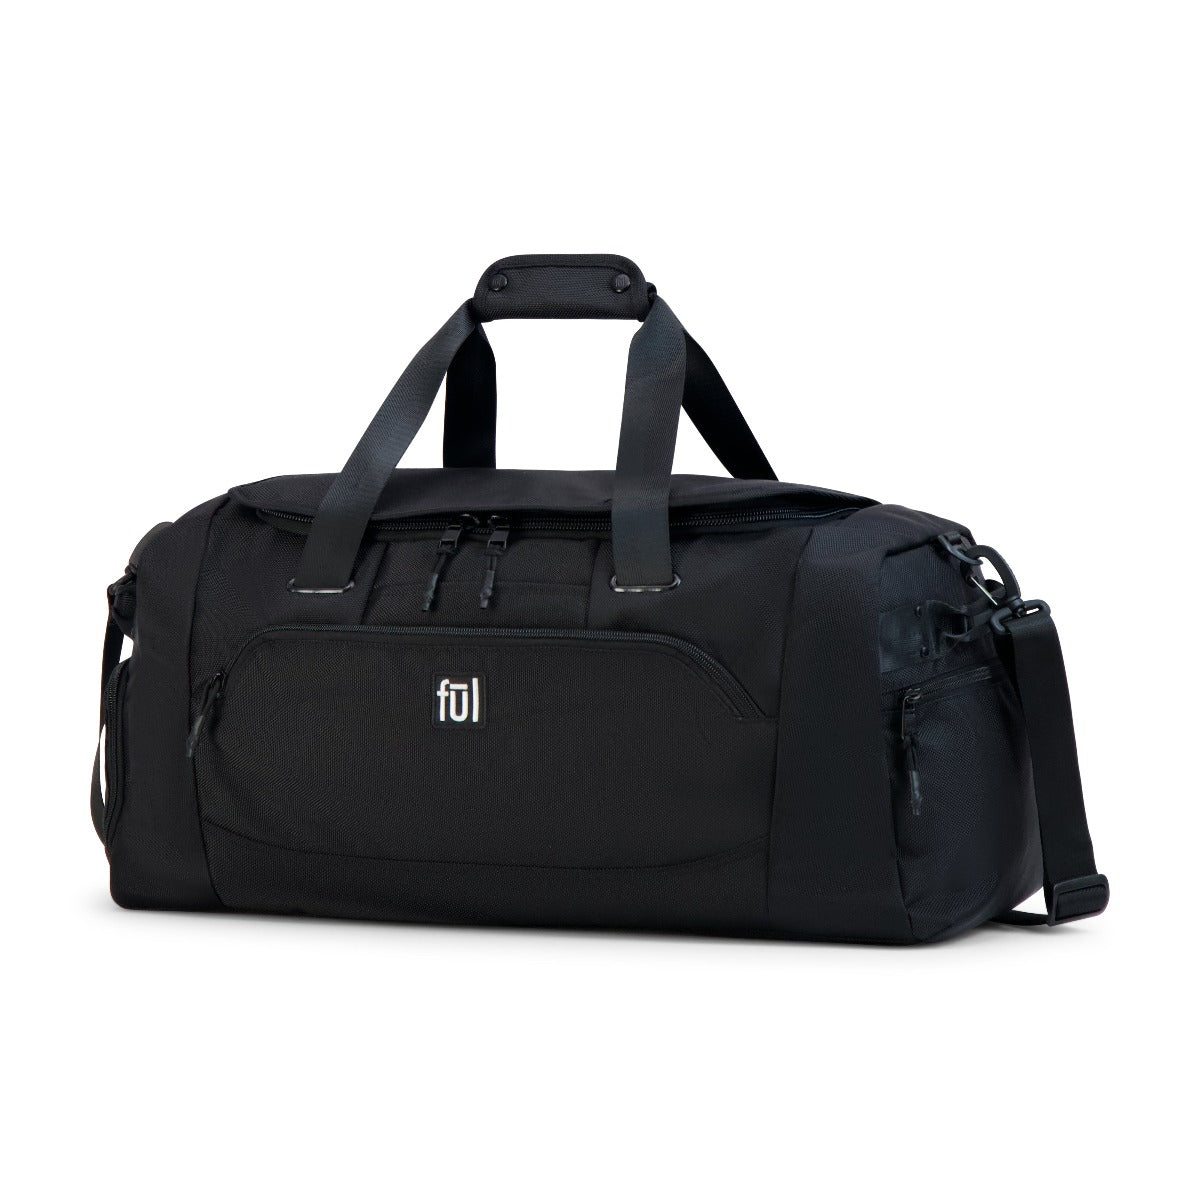 Ful Tactics Collection Siege Duffle - Black